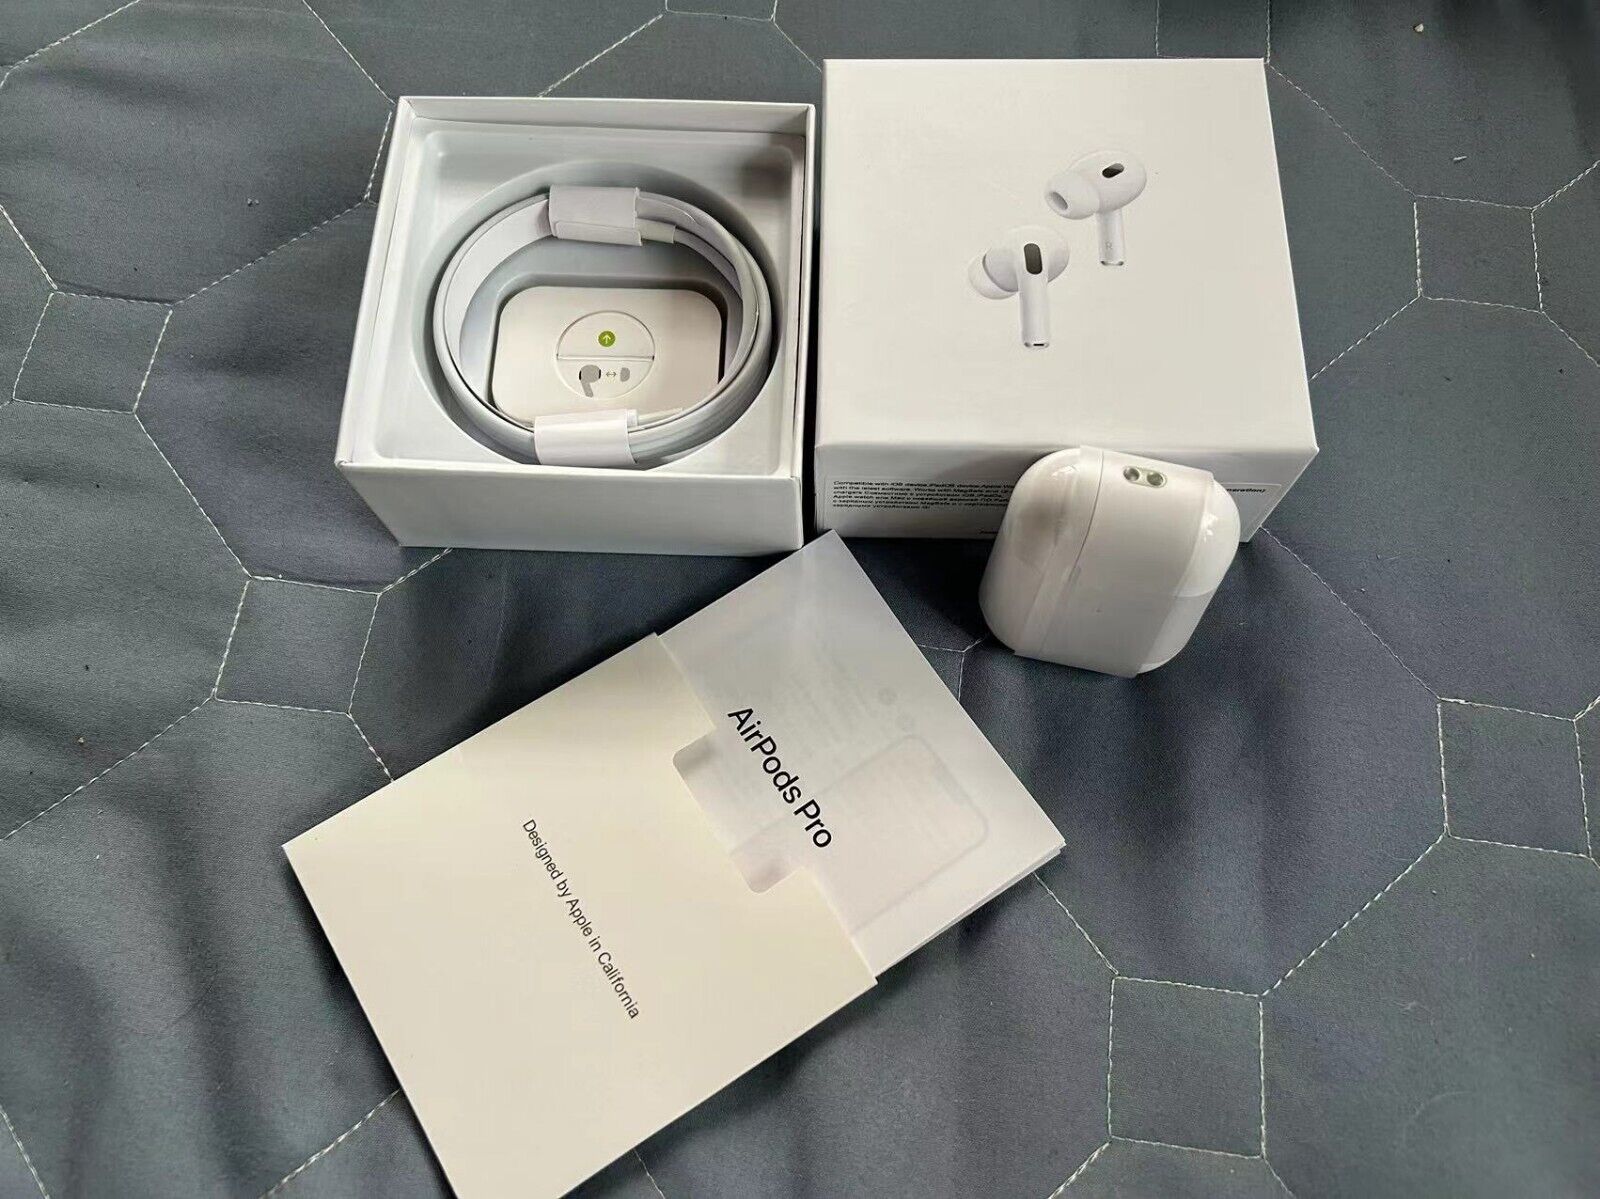 Apple Airpods Pro 2nd Generation Bluetooth Earbuds with MagSafe Charing Case